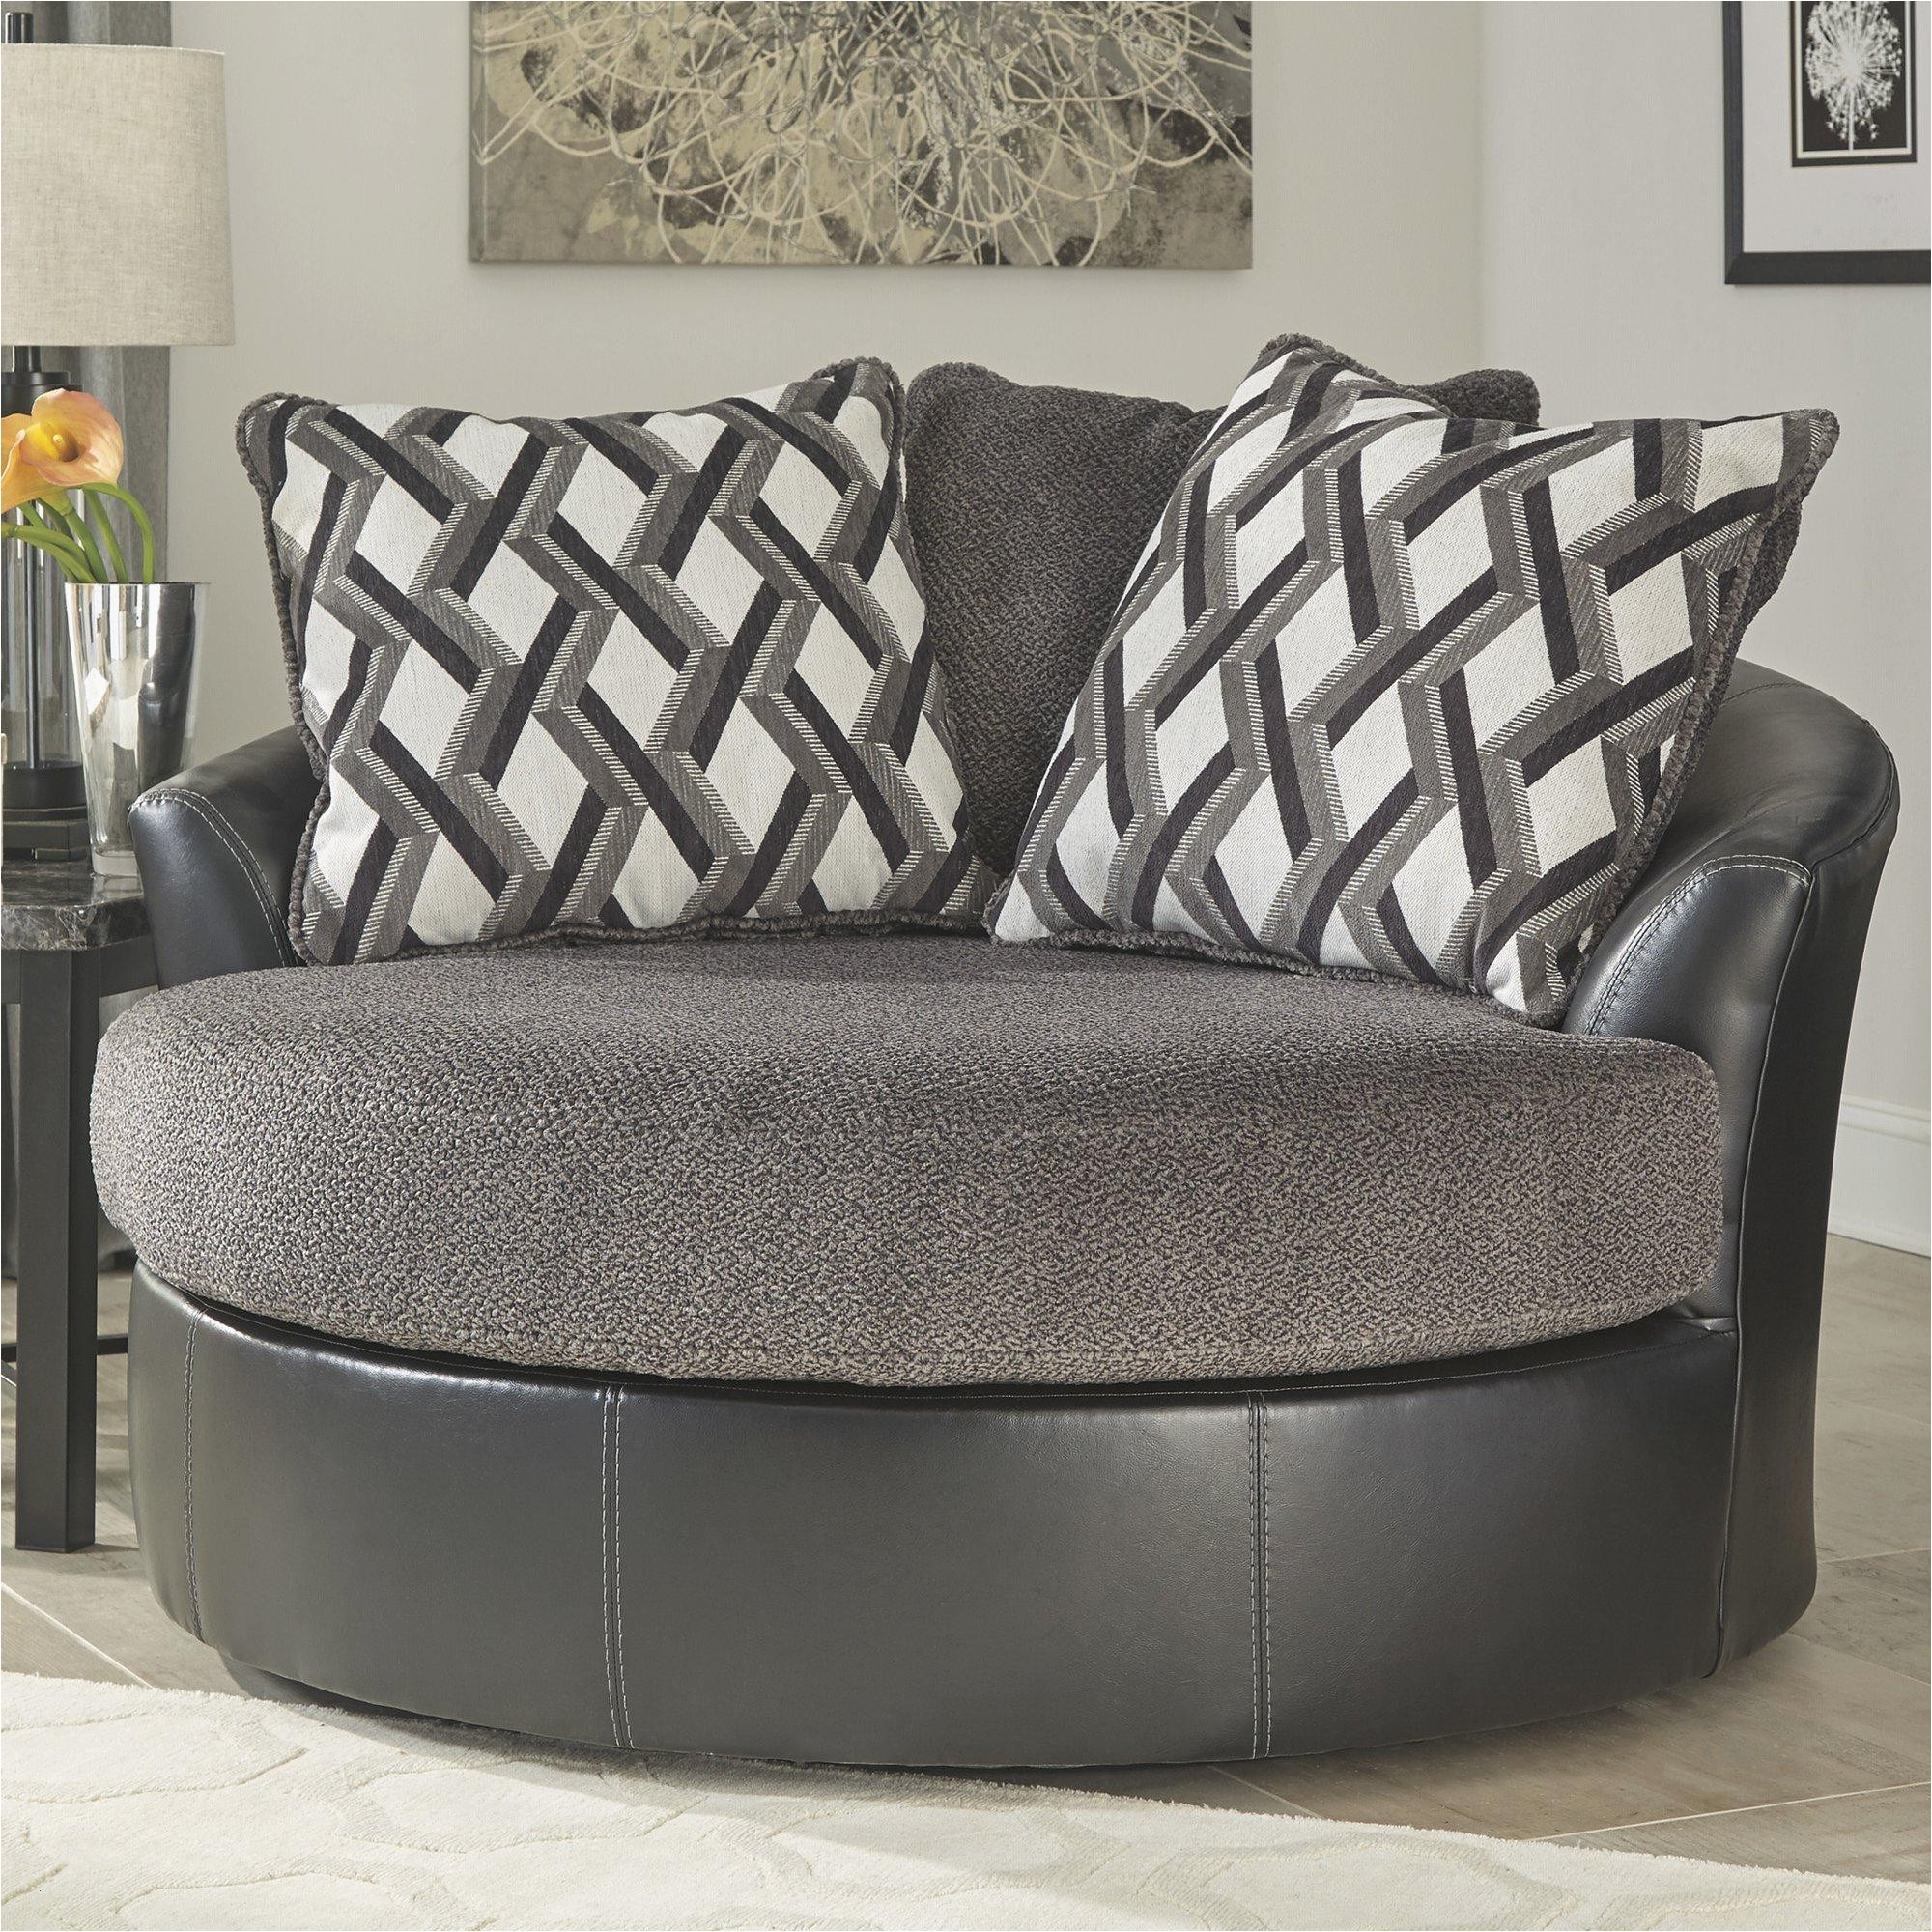 27 inspirational wayfair small sofas pictures